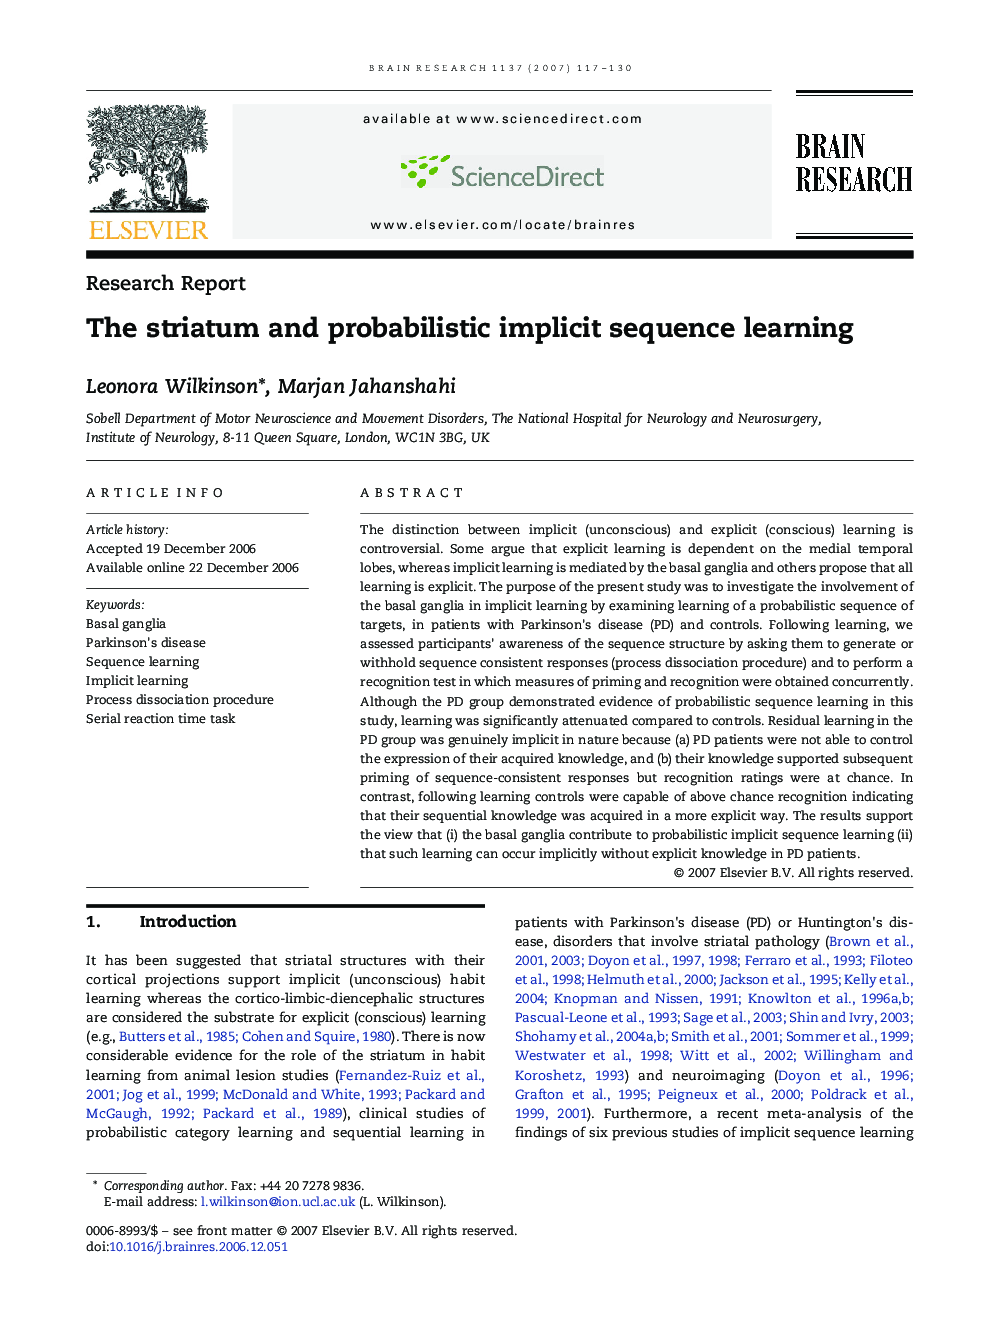 The striatum and probabilistic implicit sequence learning